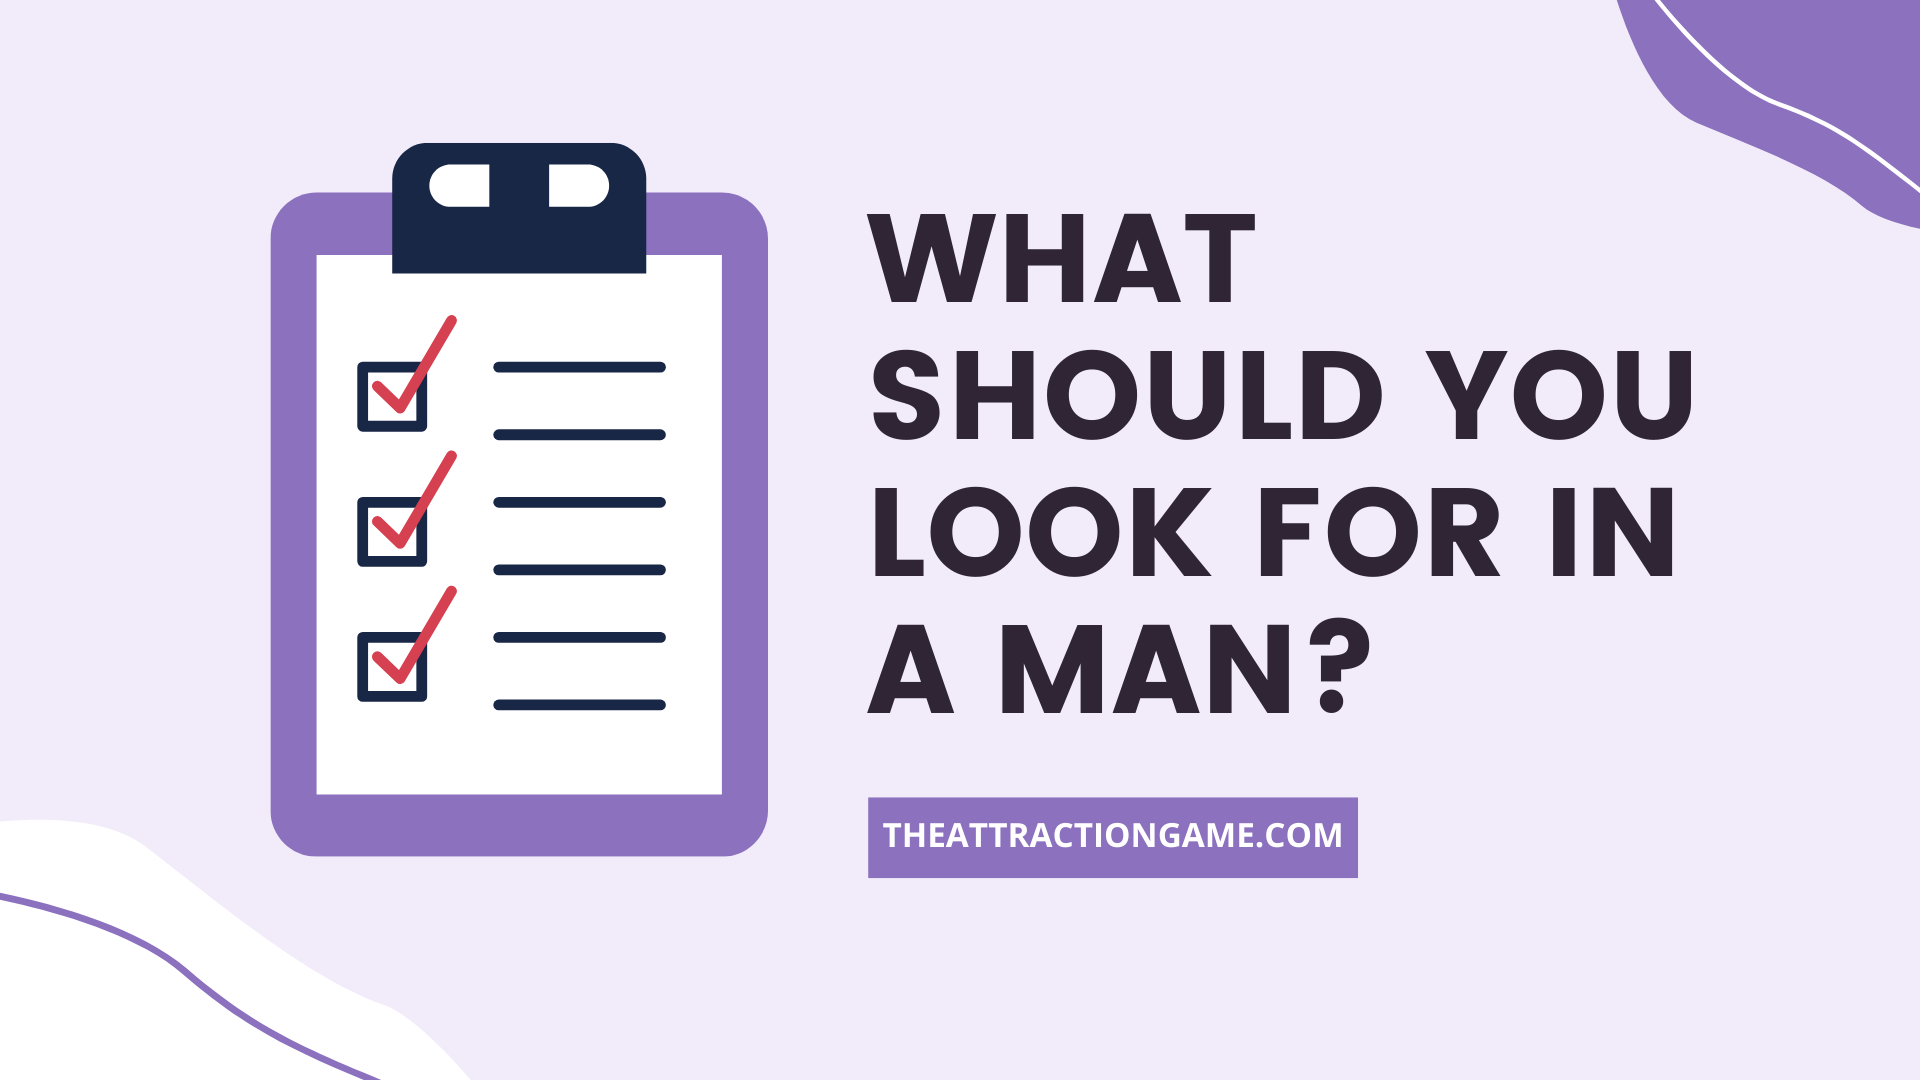 what to look for in a man, what should you look for in a man, what should a man be like, things to look for in a man, what qualities should you look for in a man